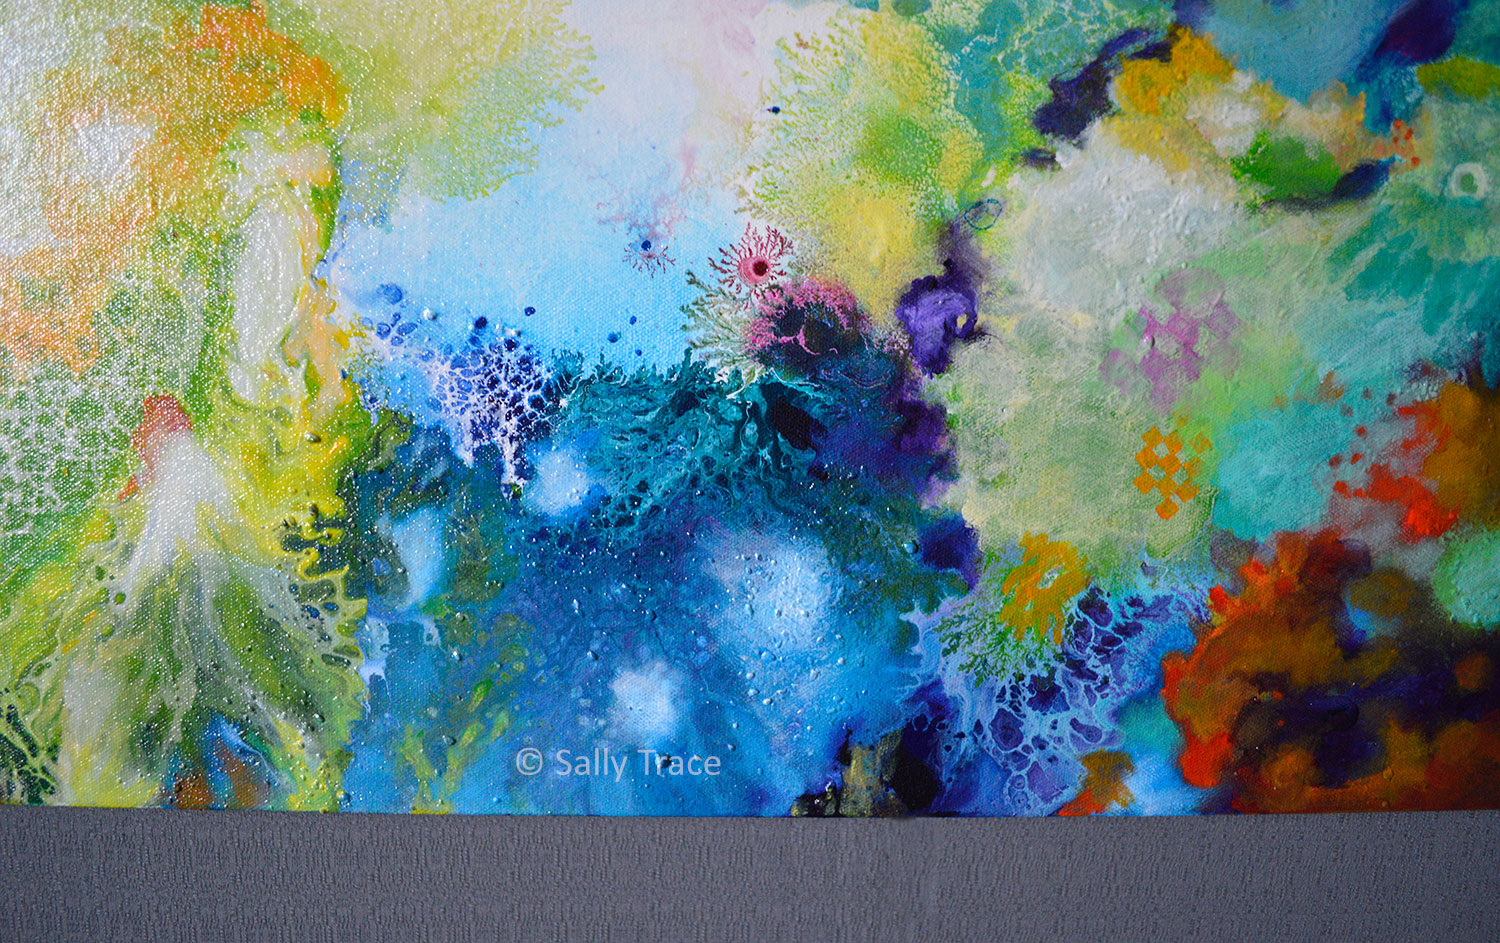 Harmonic Vibrations, original fluid acrylic pour painting for sale by Sally Trace, close up view